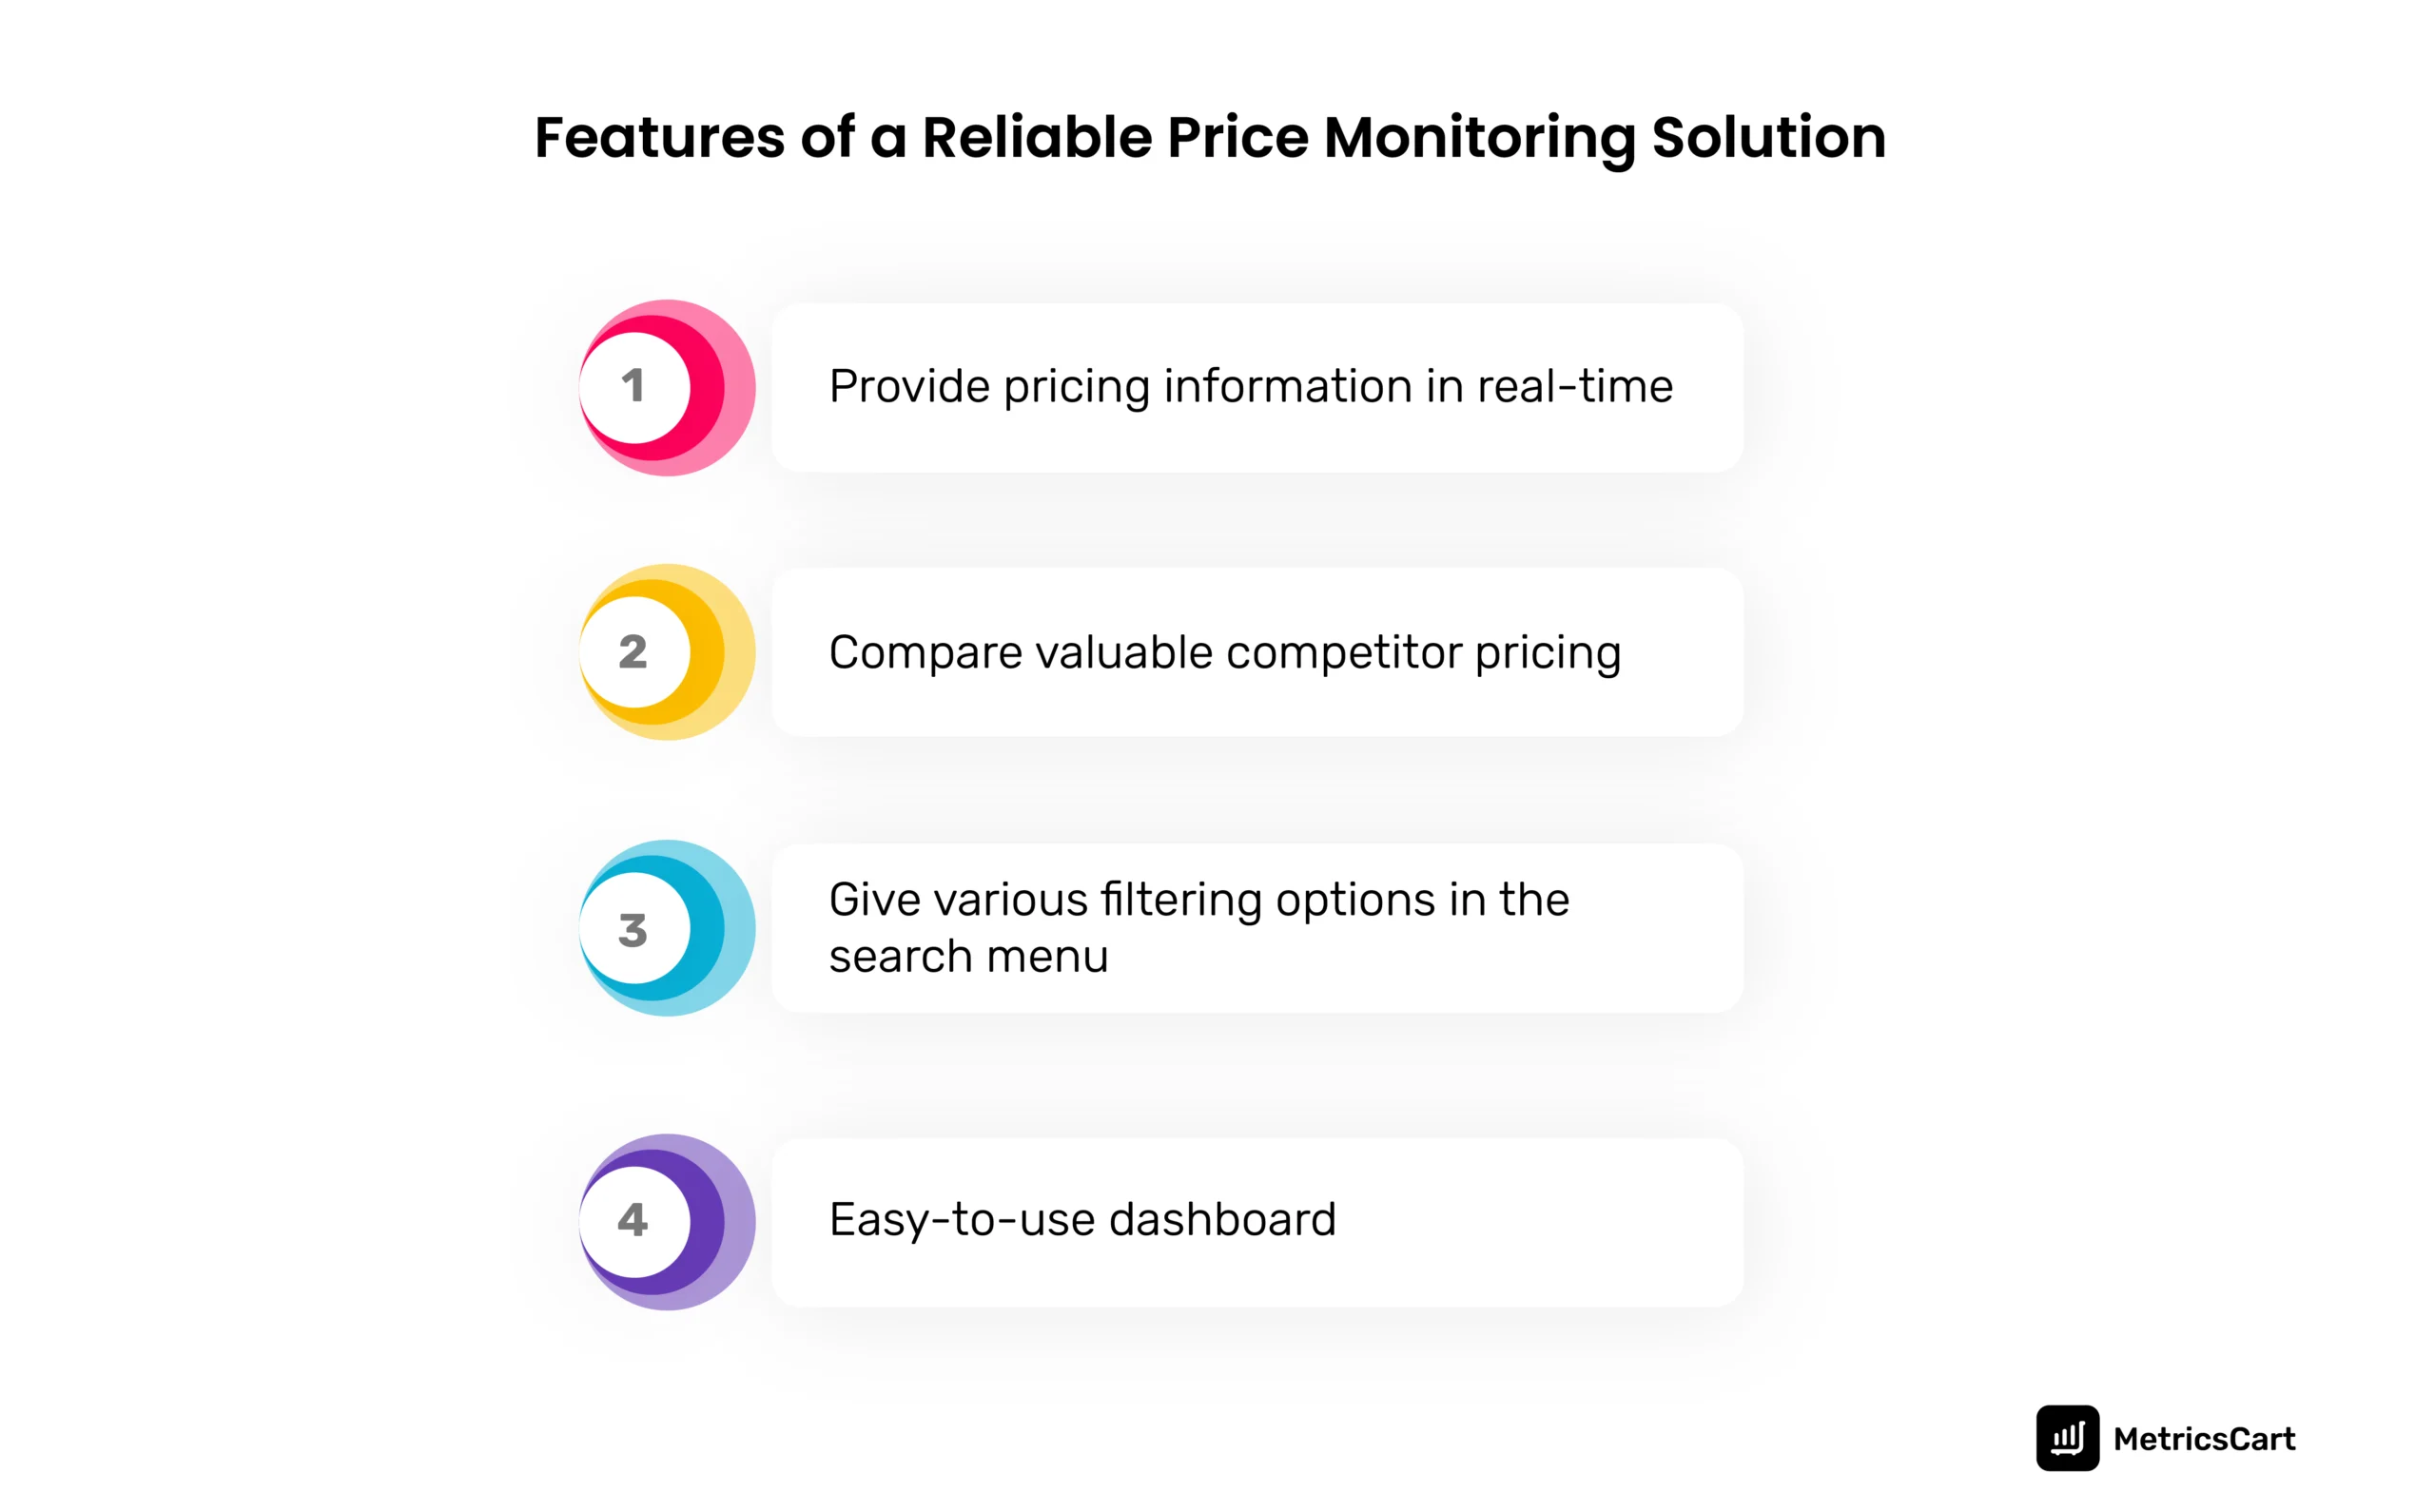 The image shows the Features of a Reliable Price Monitoring Service Provider